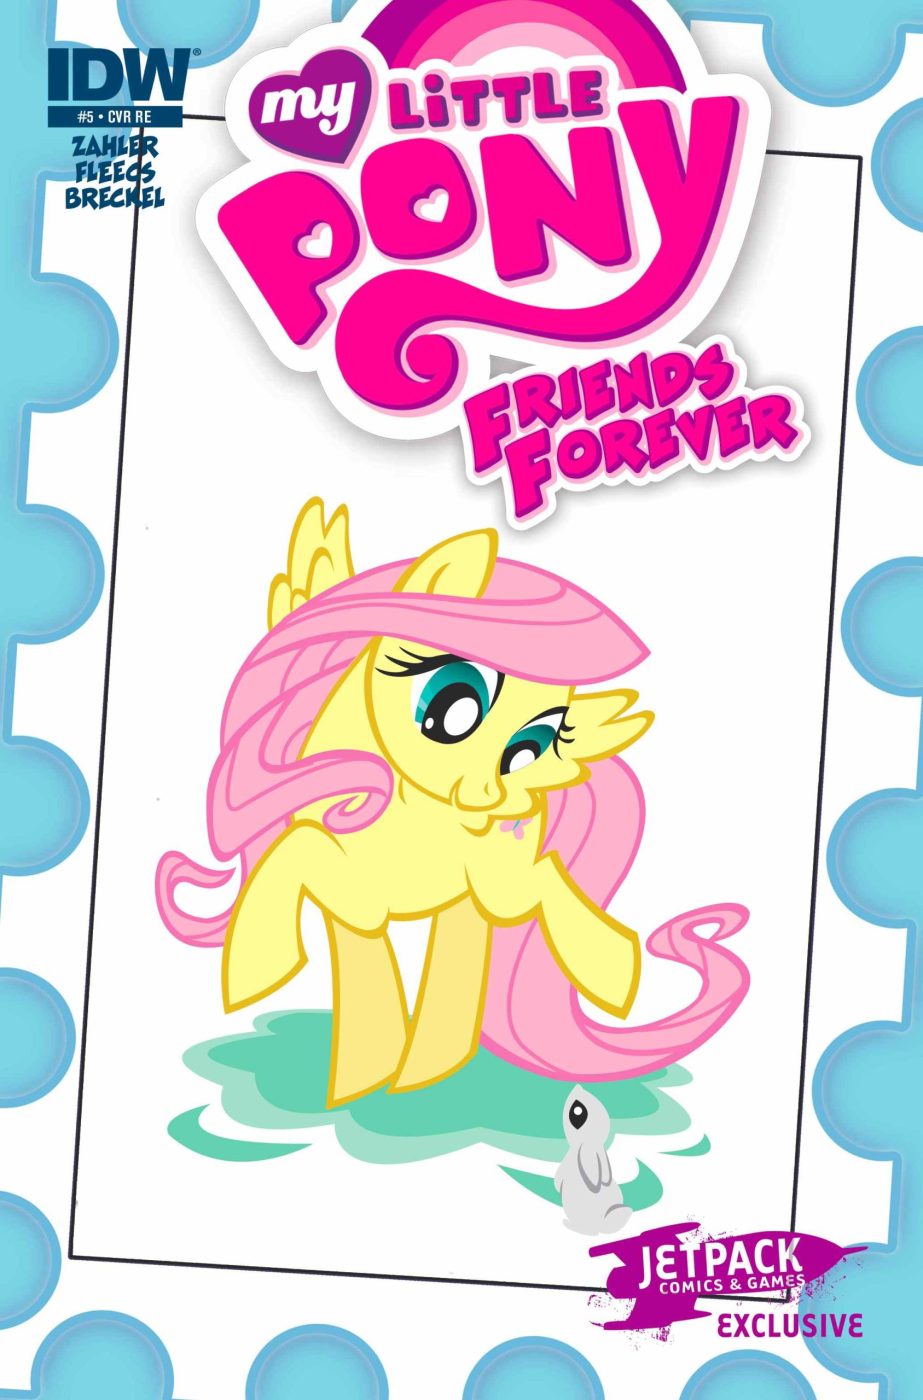 My Little Pony Friends Forever #5 (Jetpack Exclusive B)